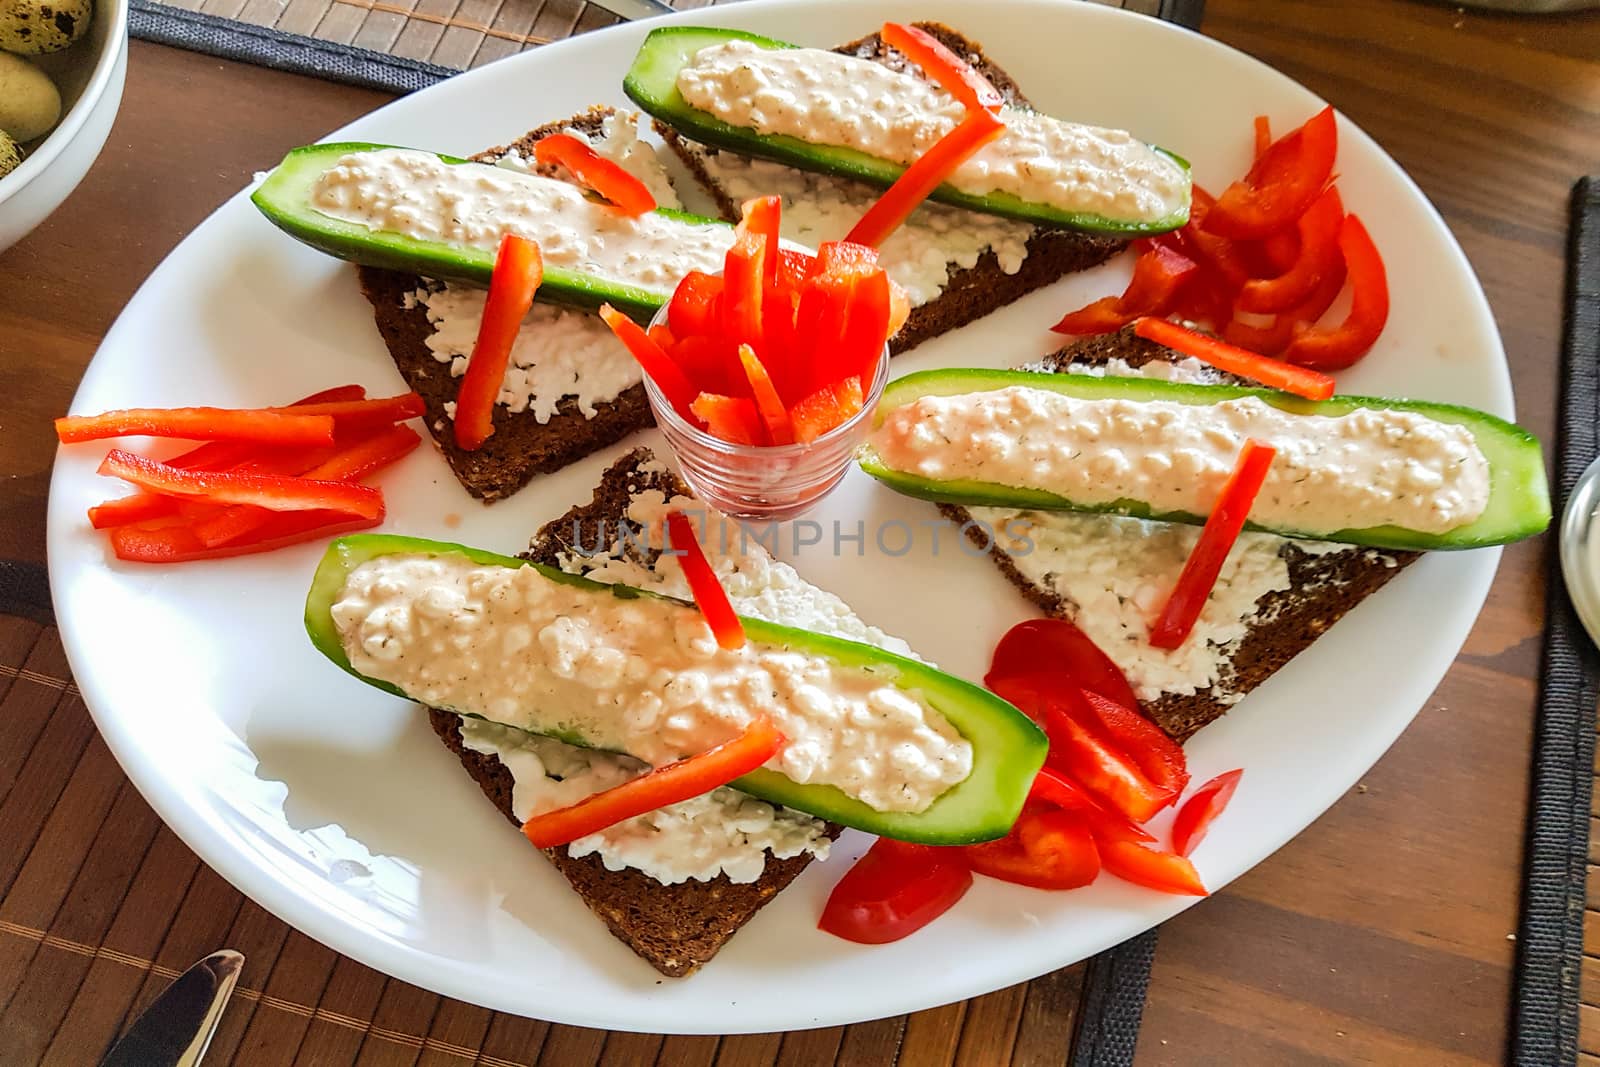 Cucumber cut in half with fresh quark and pepper strips stuffed on black bread. A low-calorie meal and vegan entree